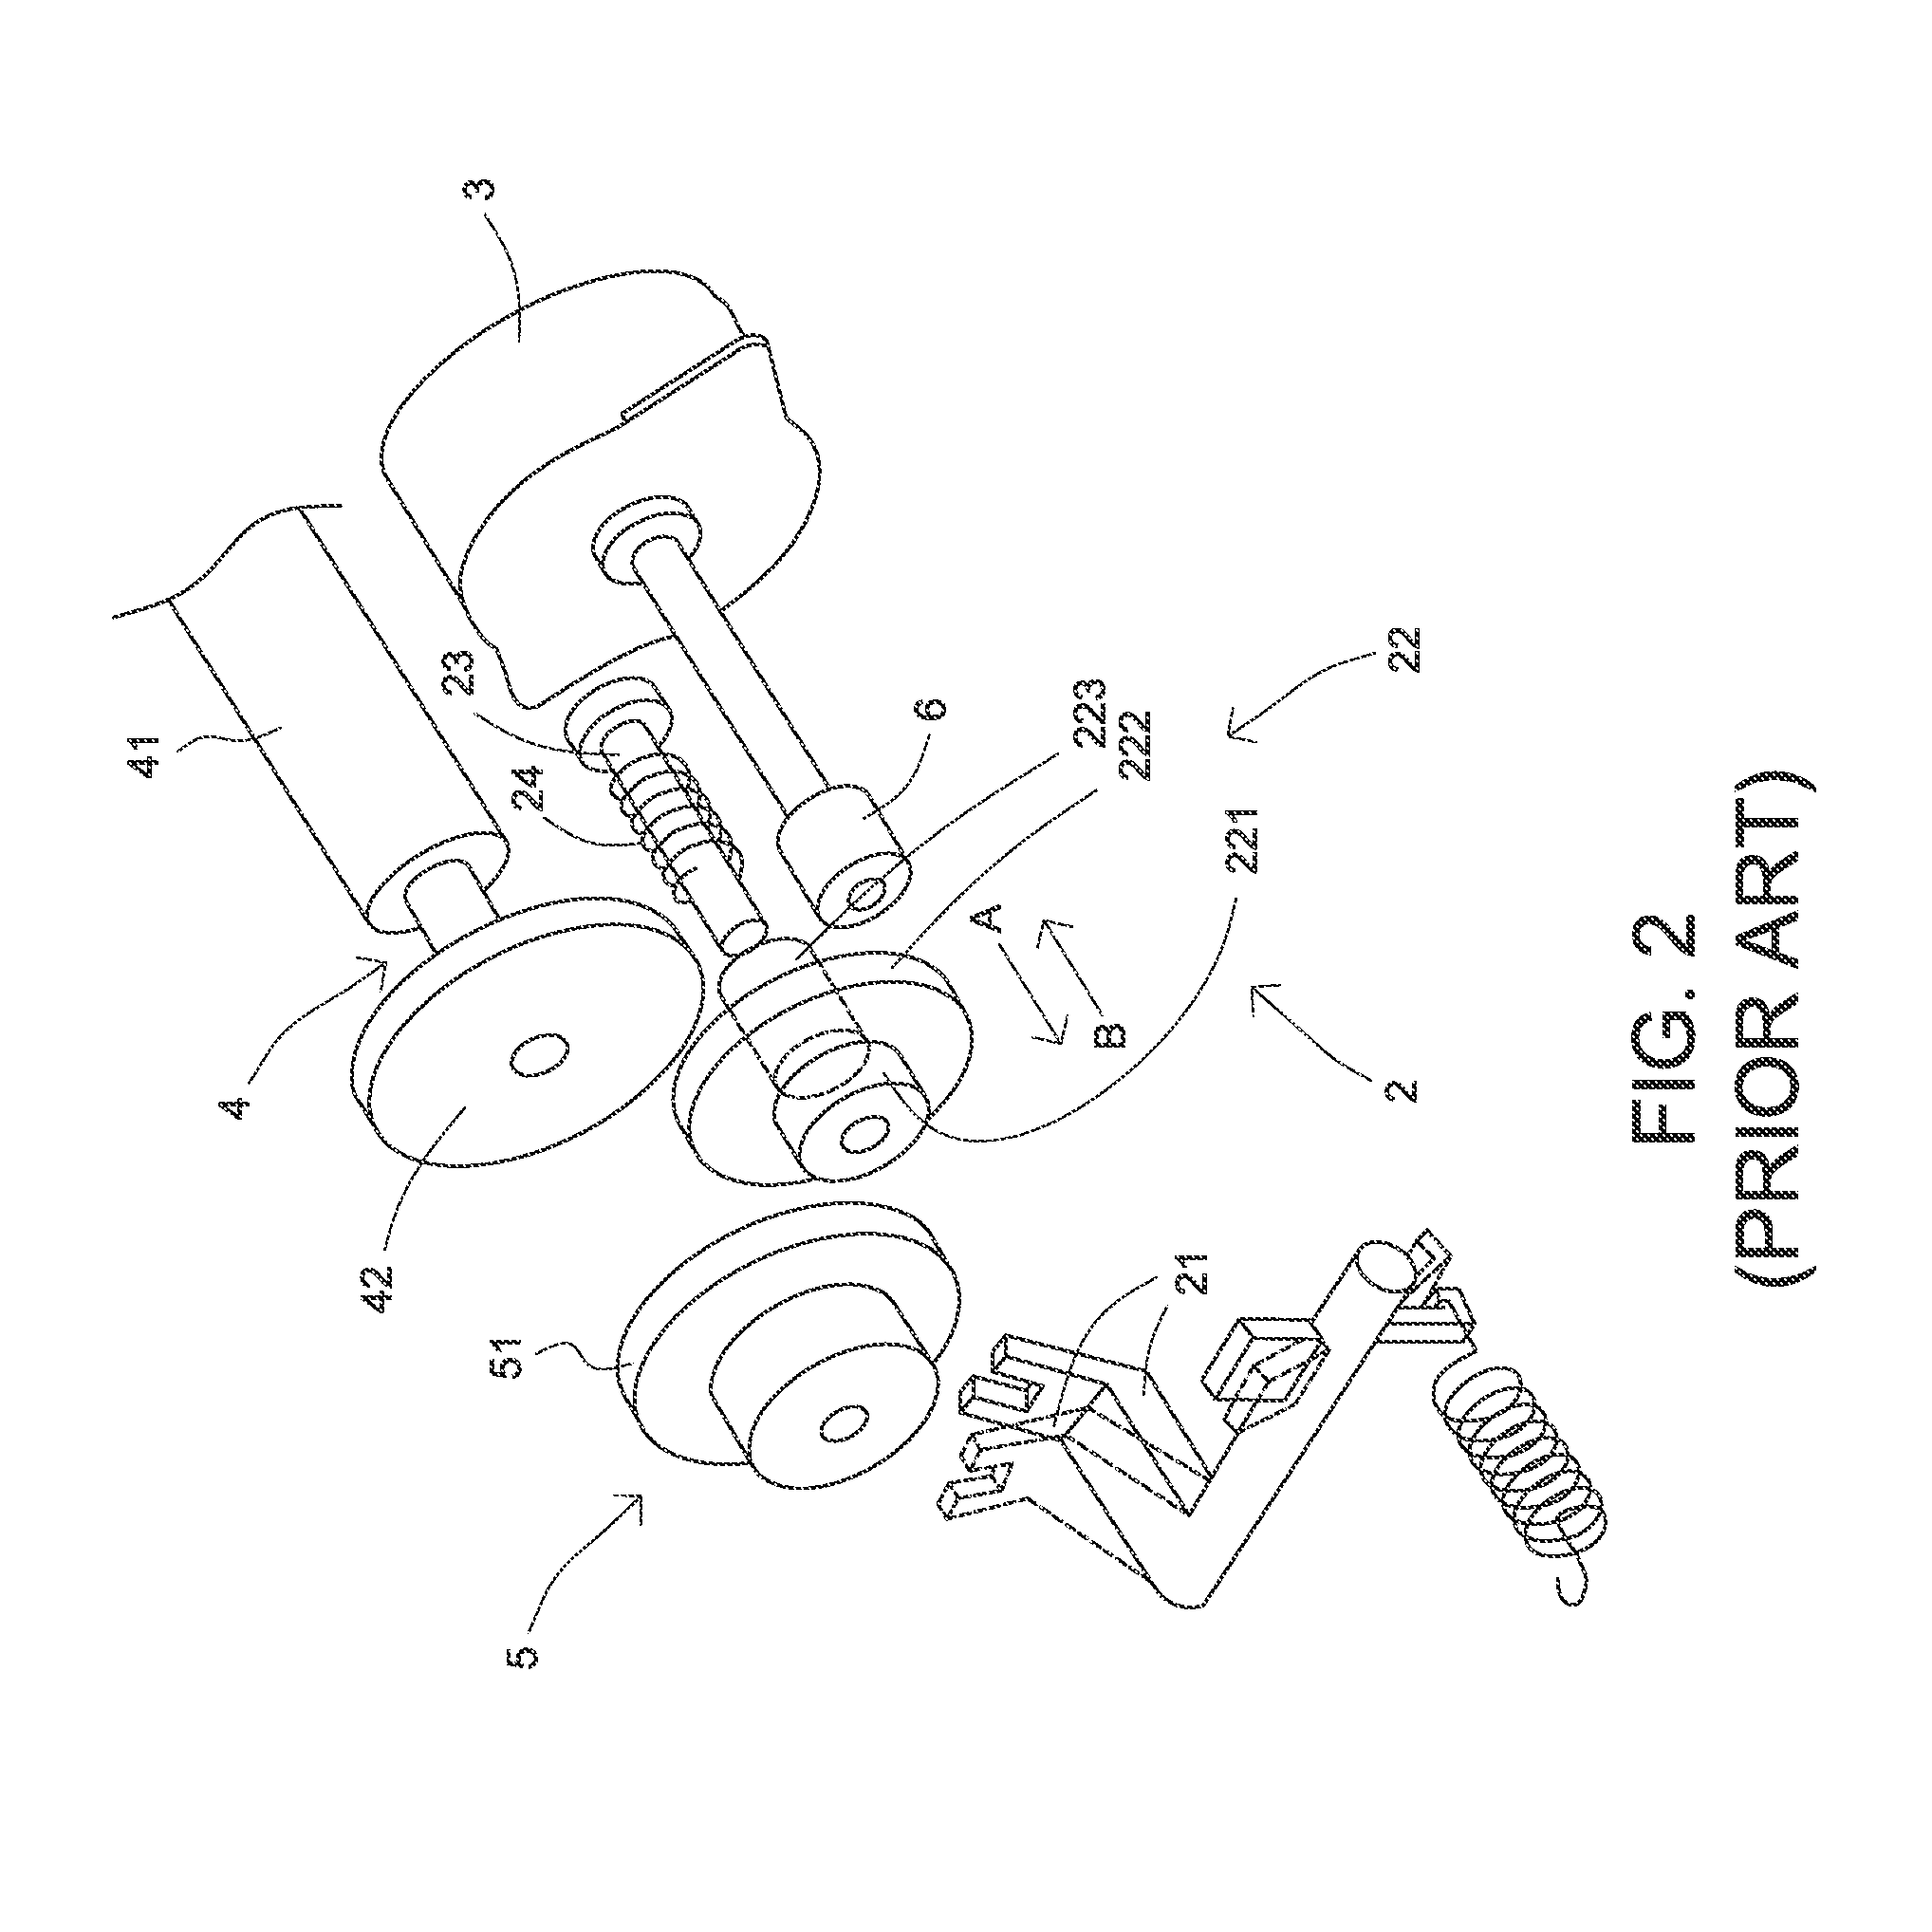 Clutch transmission mechanism of printing device